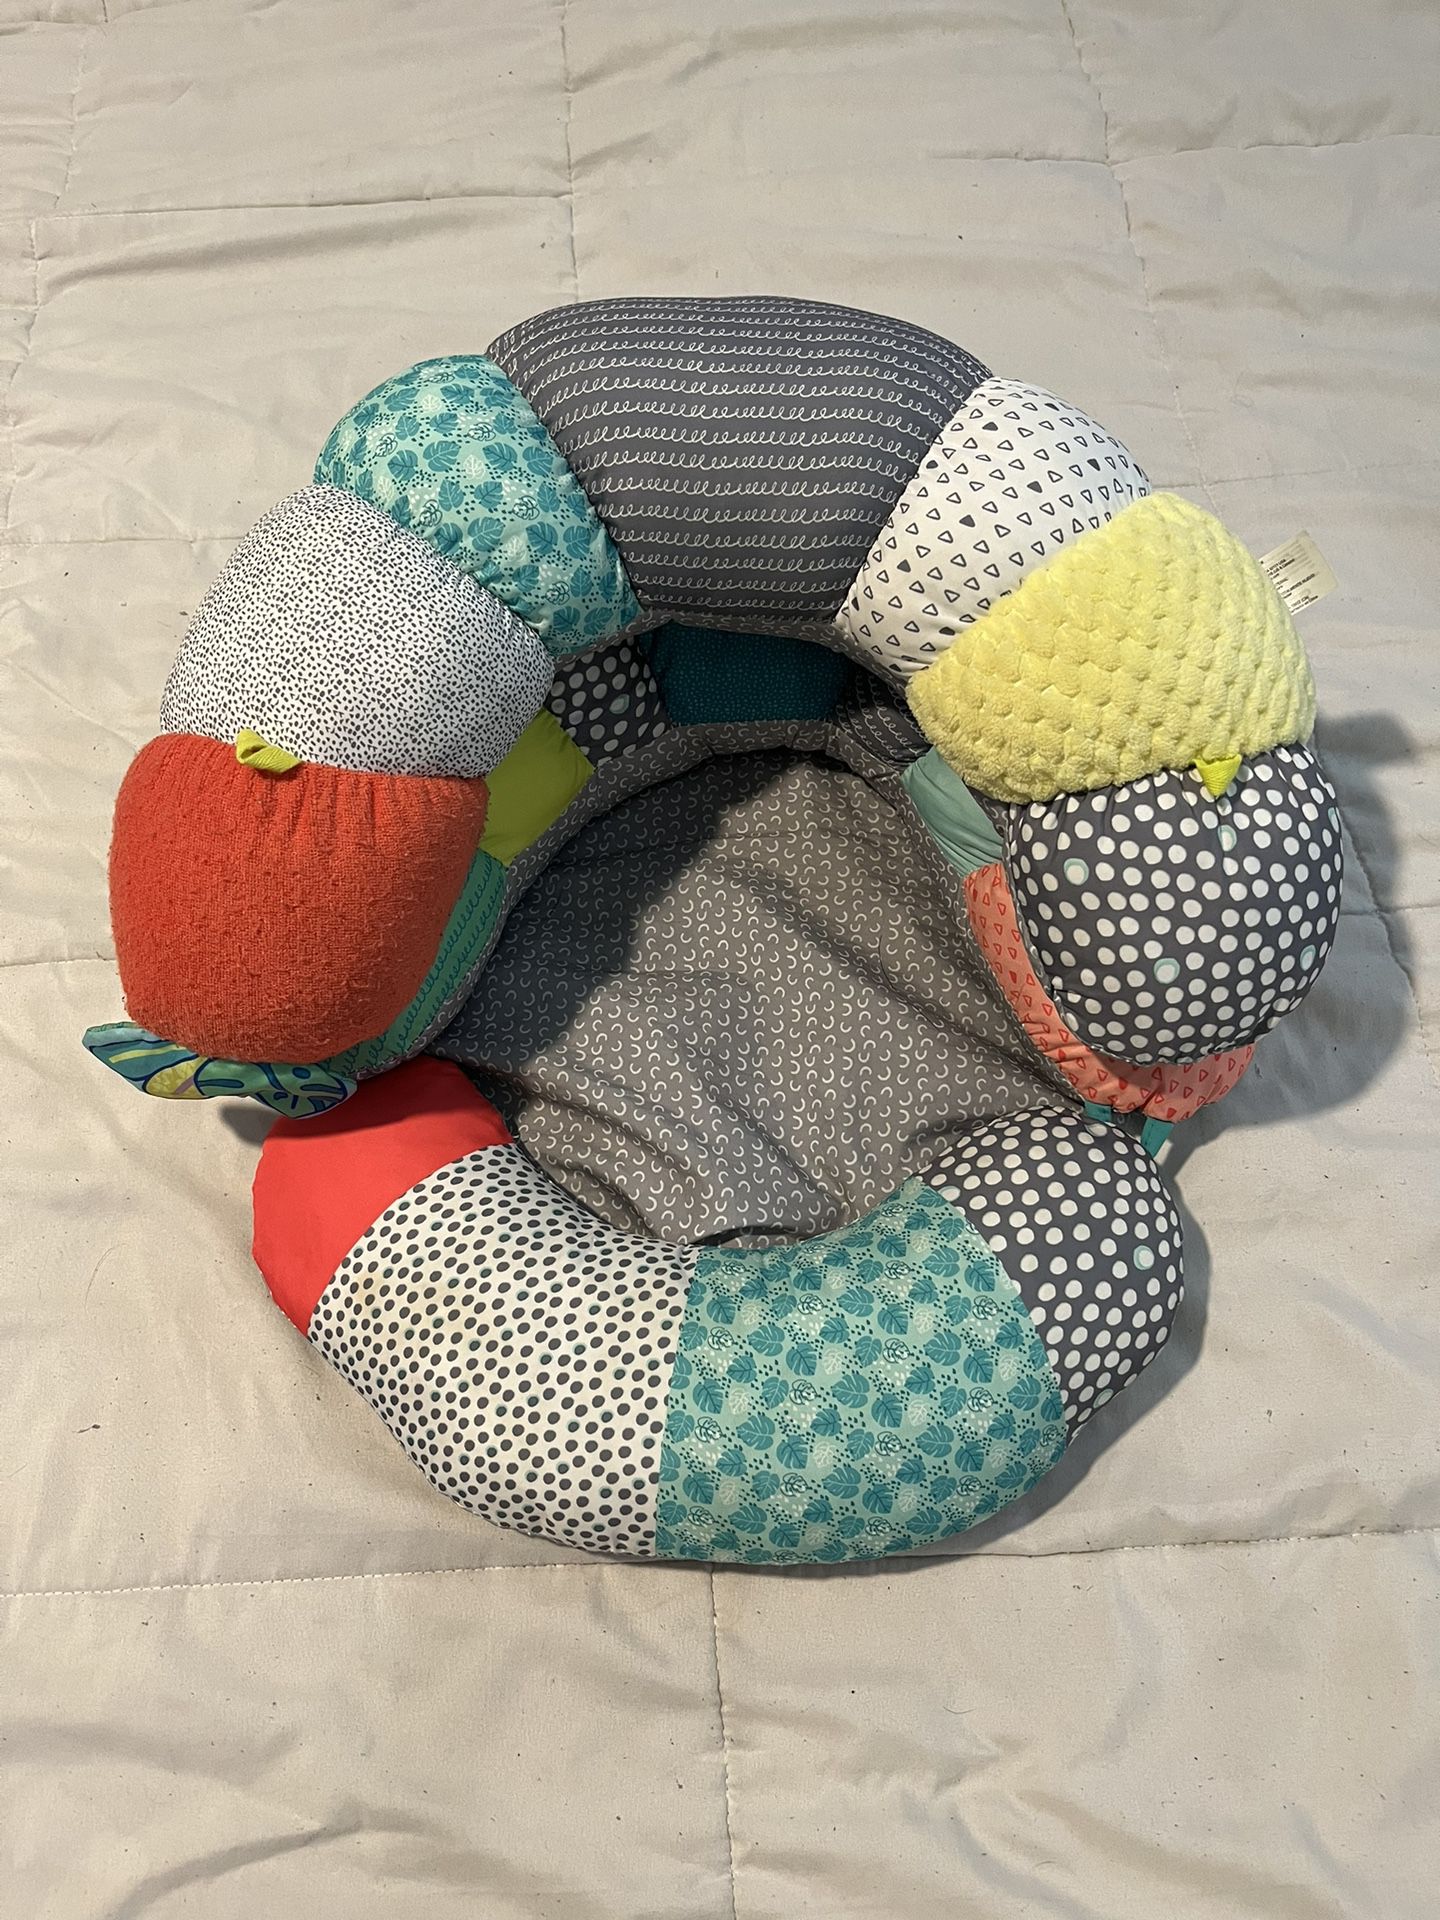 2-in-1 Tummy Time Pillow